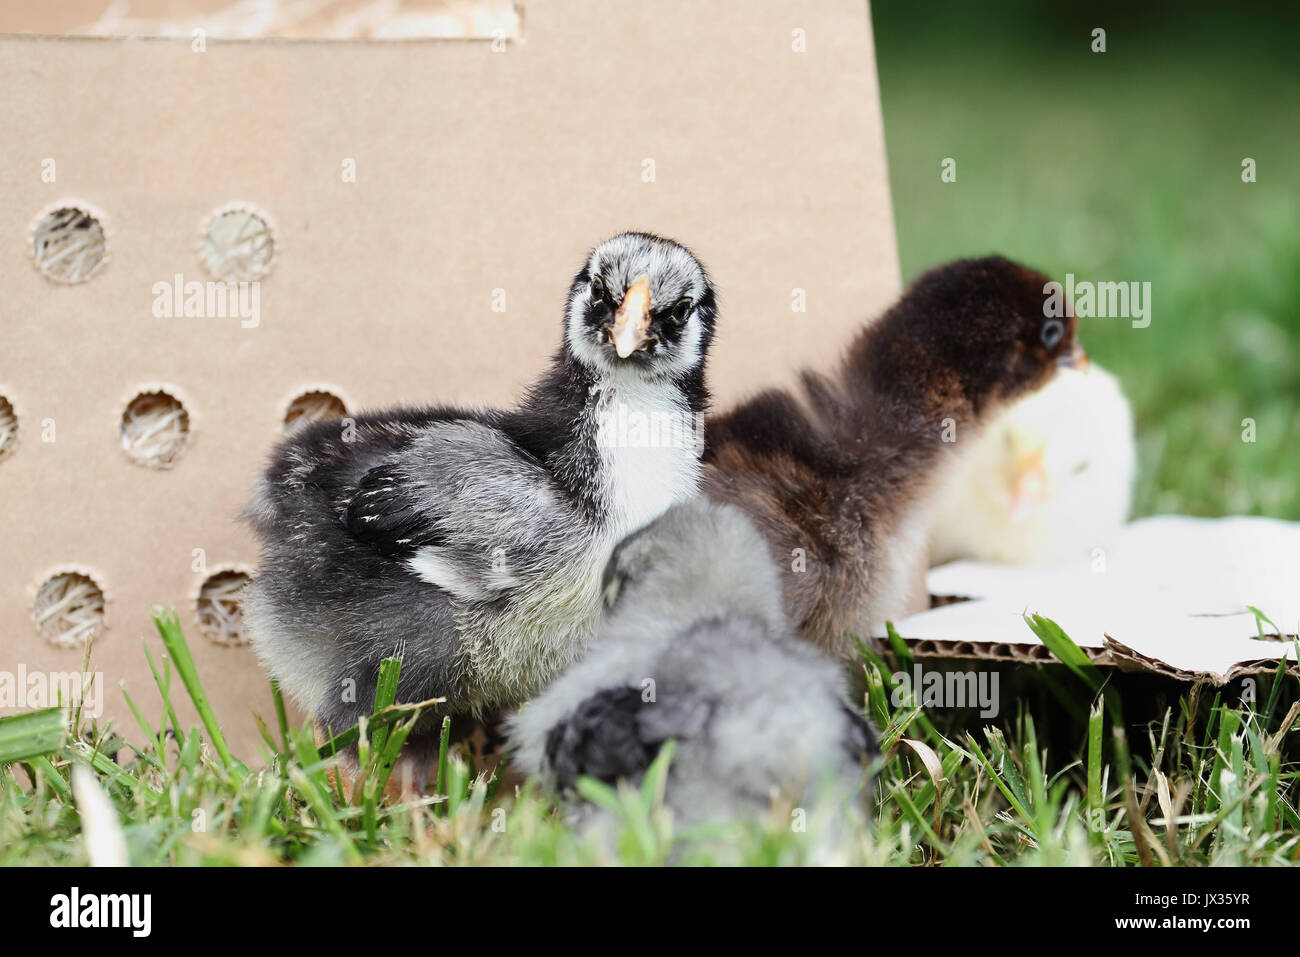 Mail ordered baby Silver Laced Wynadottes and Cochin chicks beside a packing box. Extreme depth of field with selective focus on the little Silver Lac Stock Photo